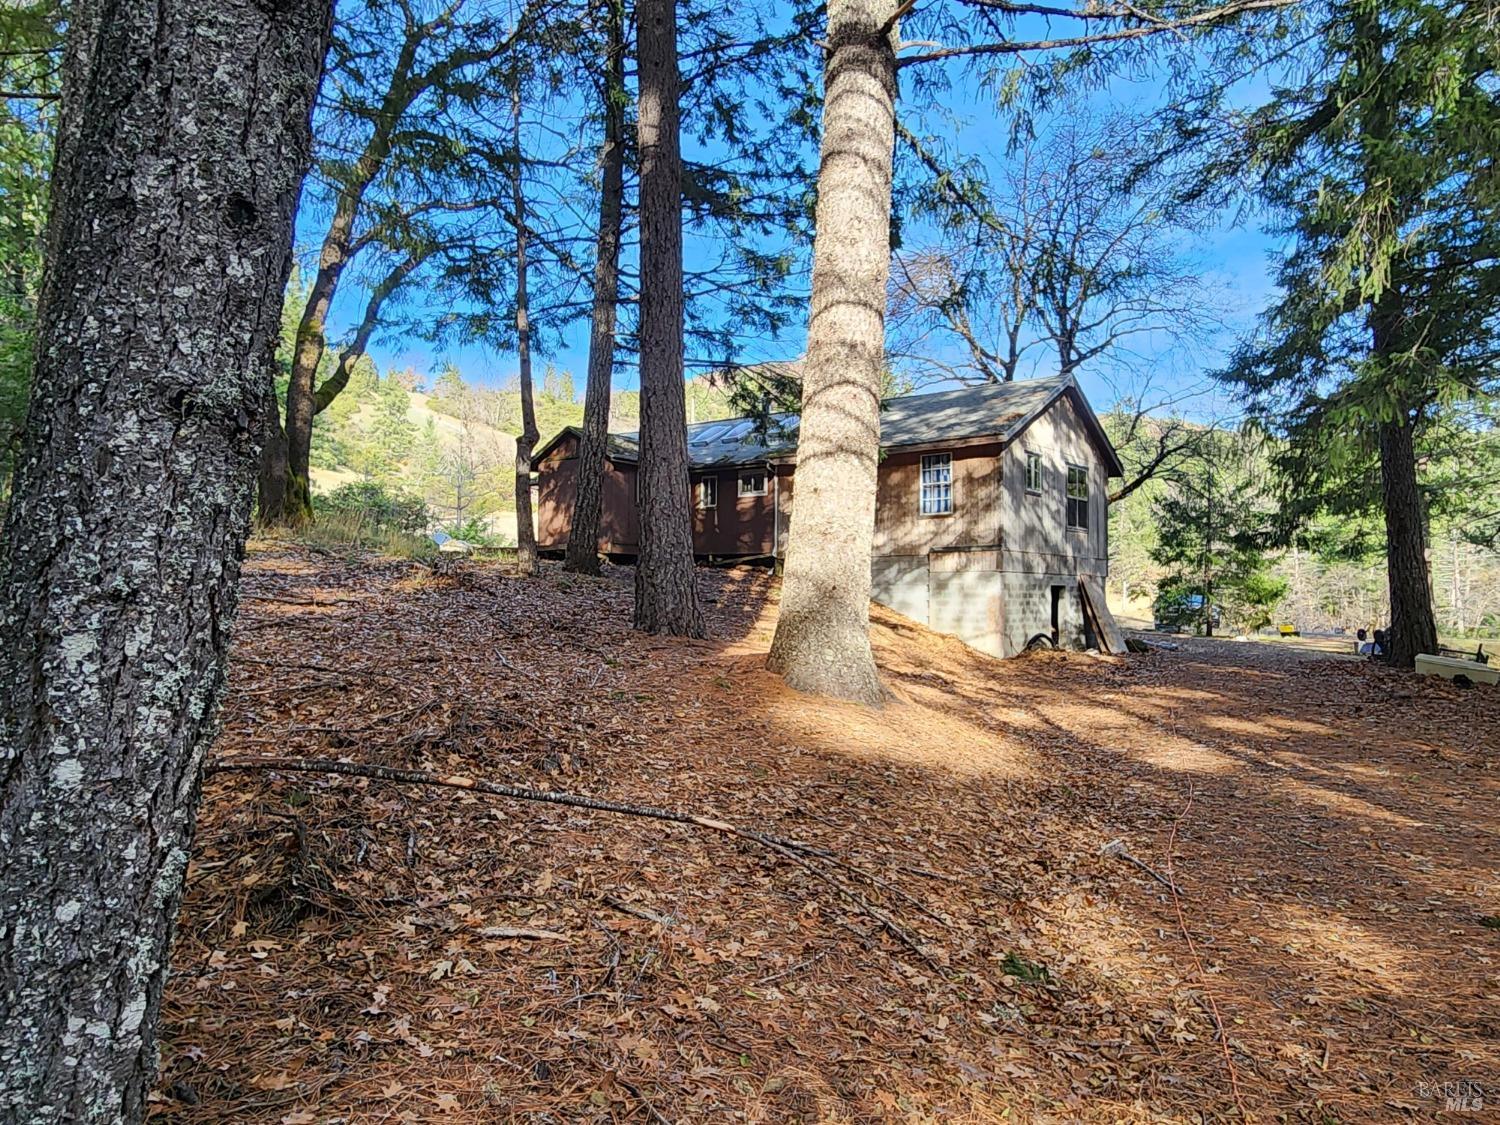 Photo of 53401 Iron Creek Rd in Laytonville, CA